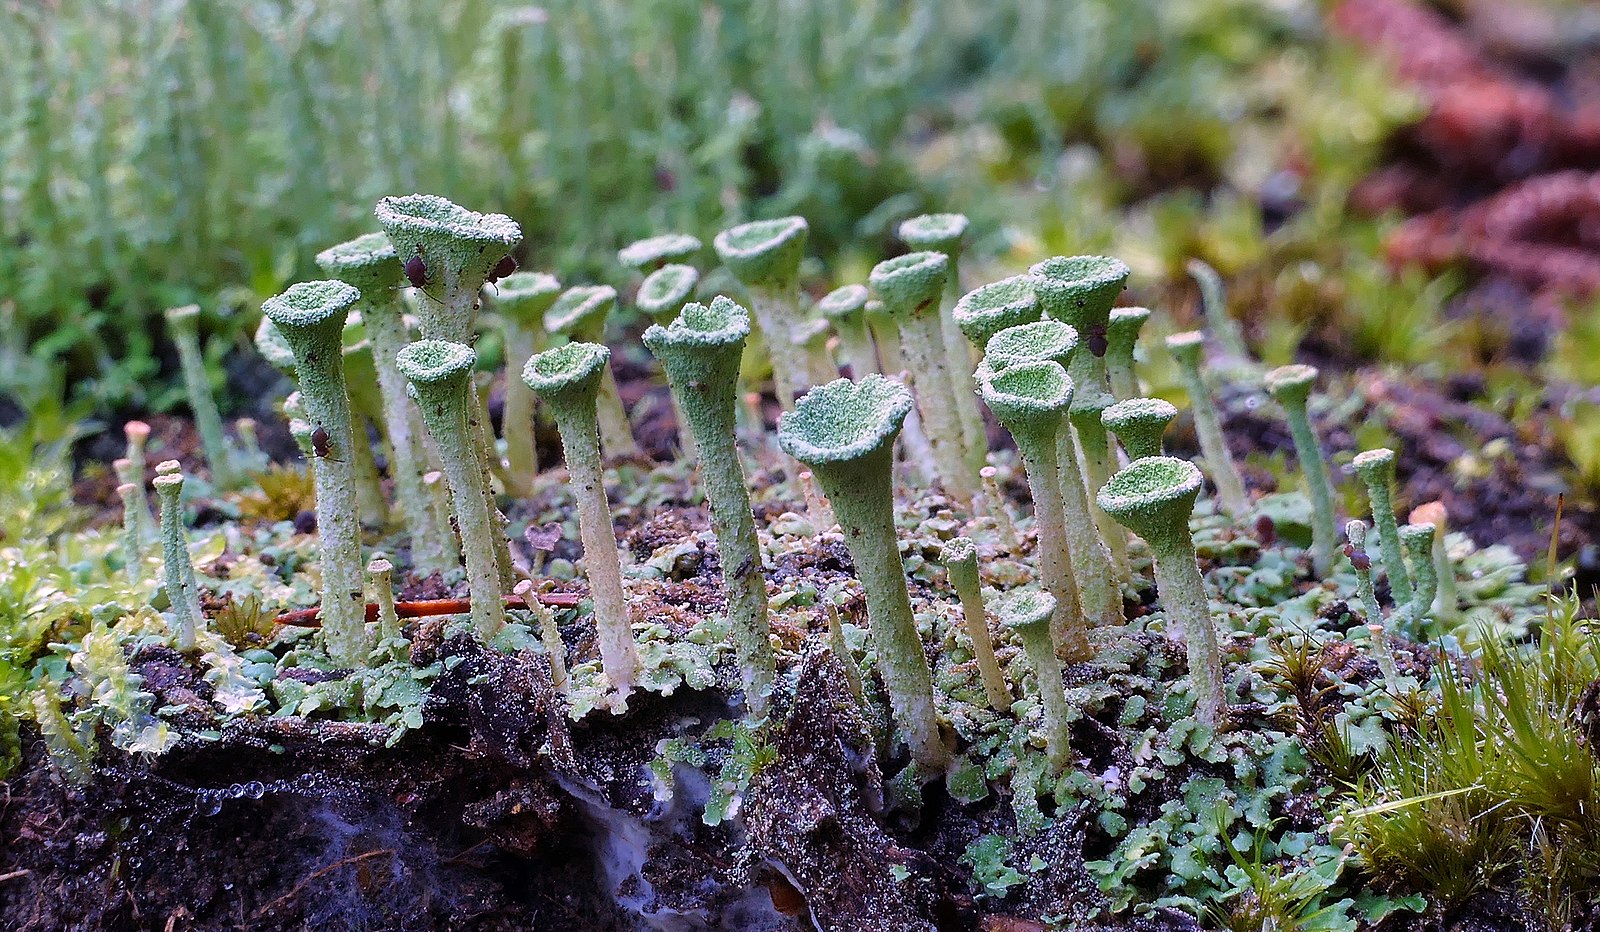 Green pixie cups lichen growing. They are green, and grow a few inches up into a divoted tops